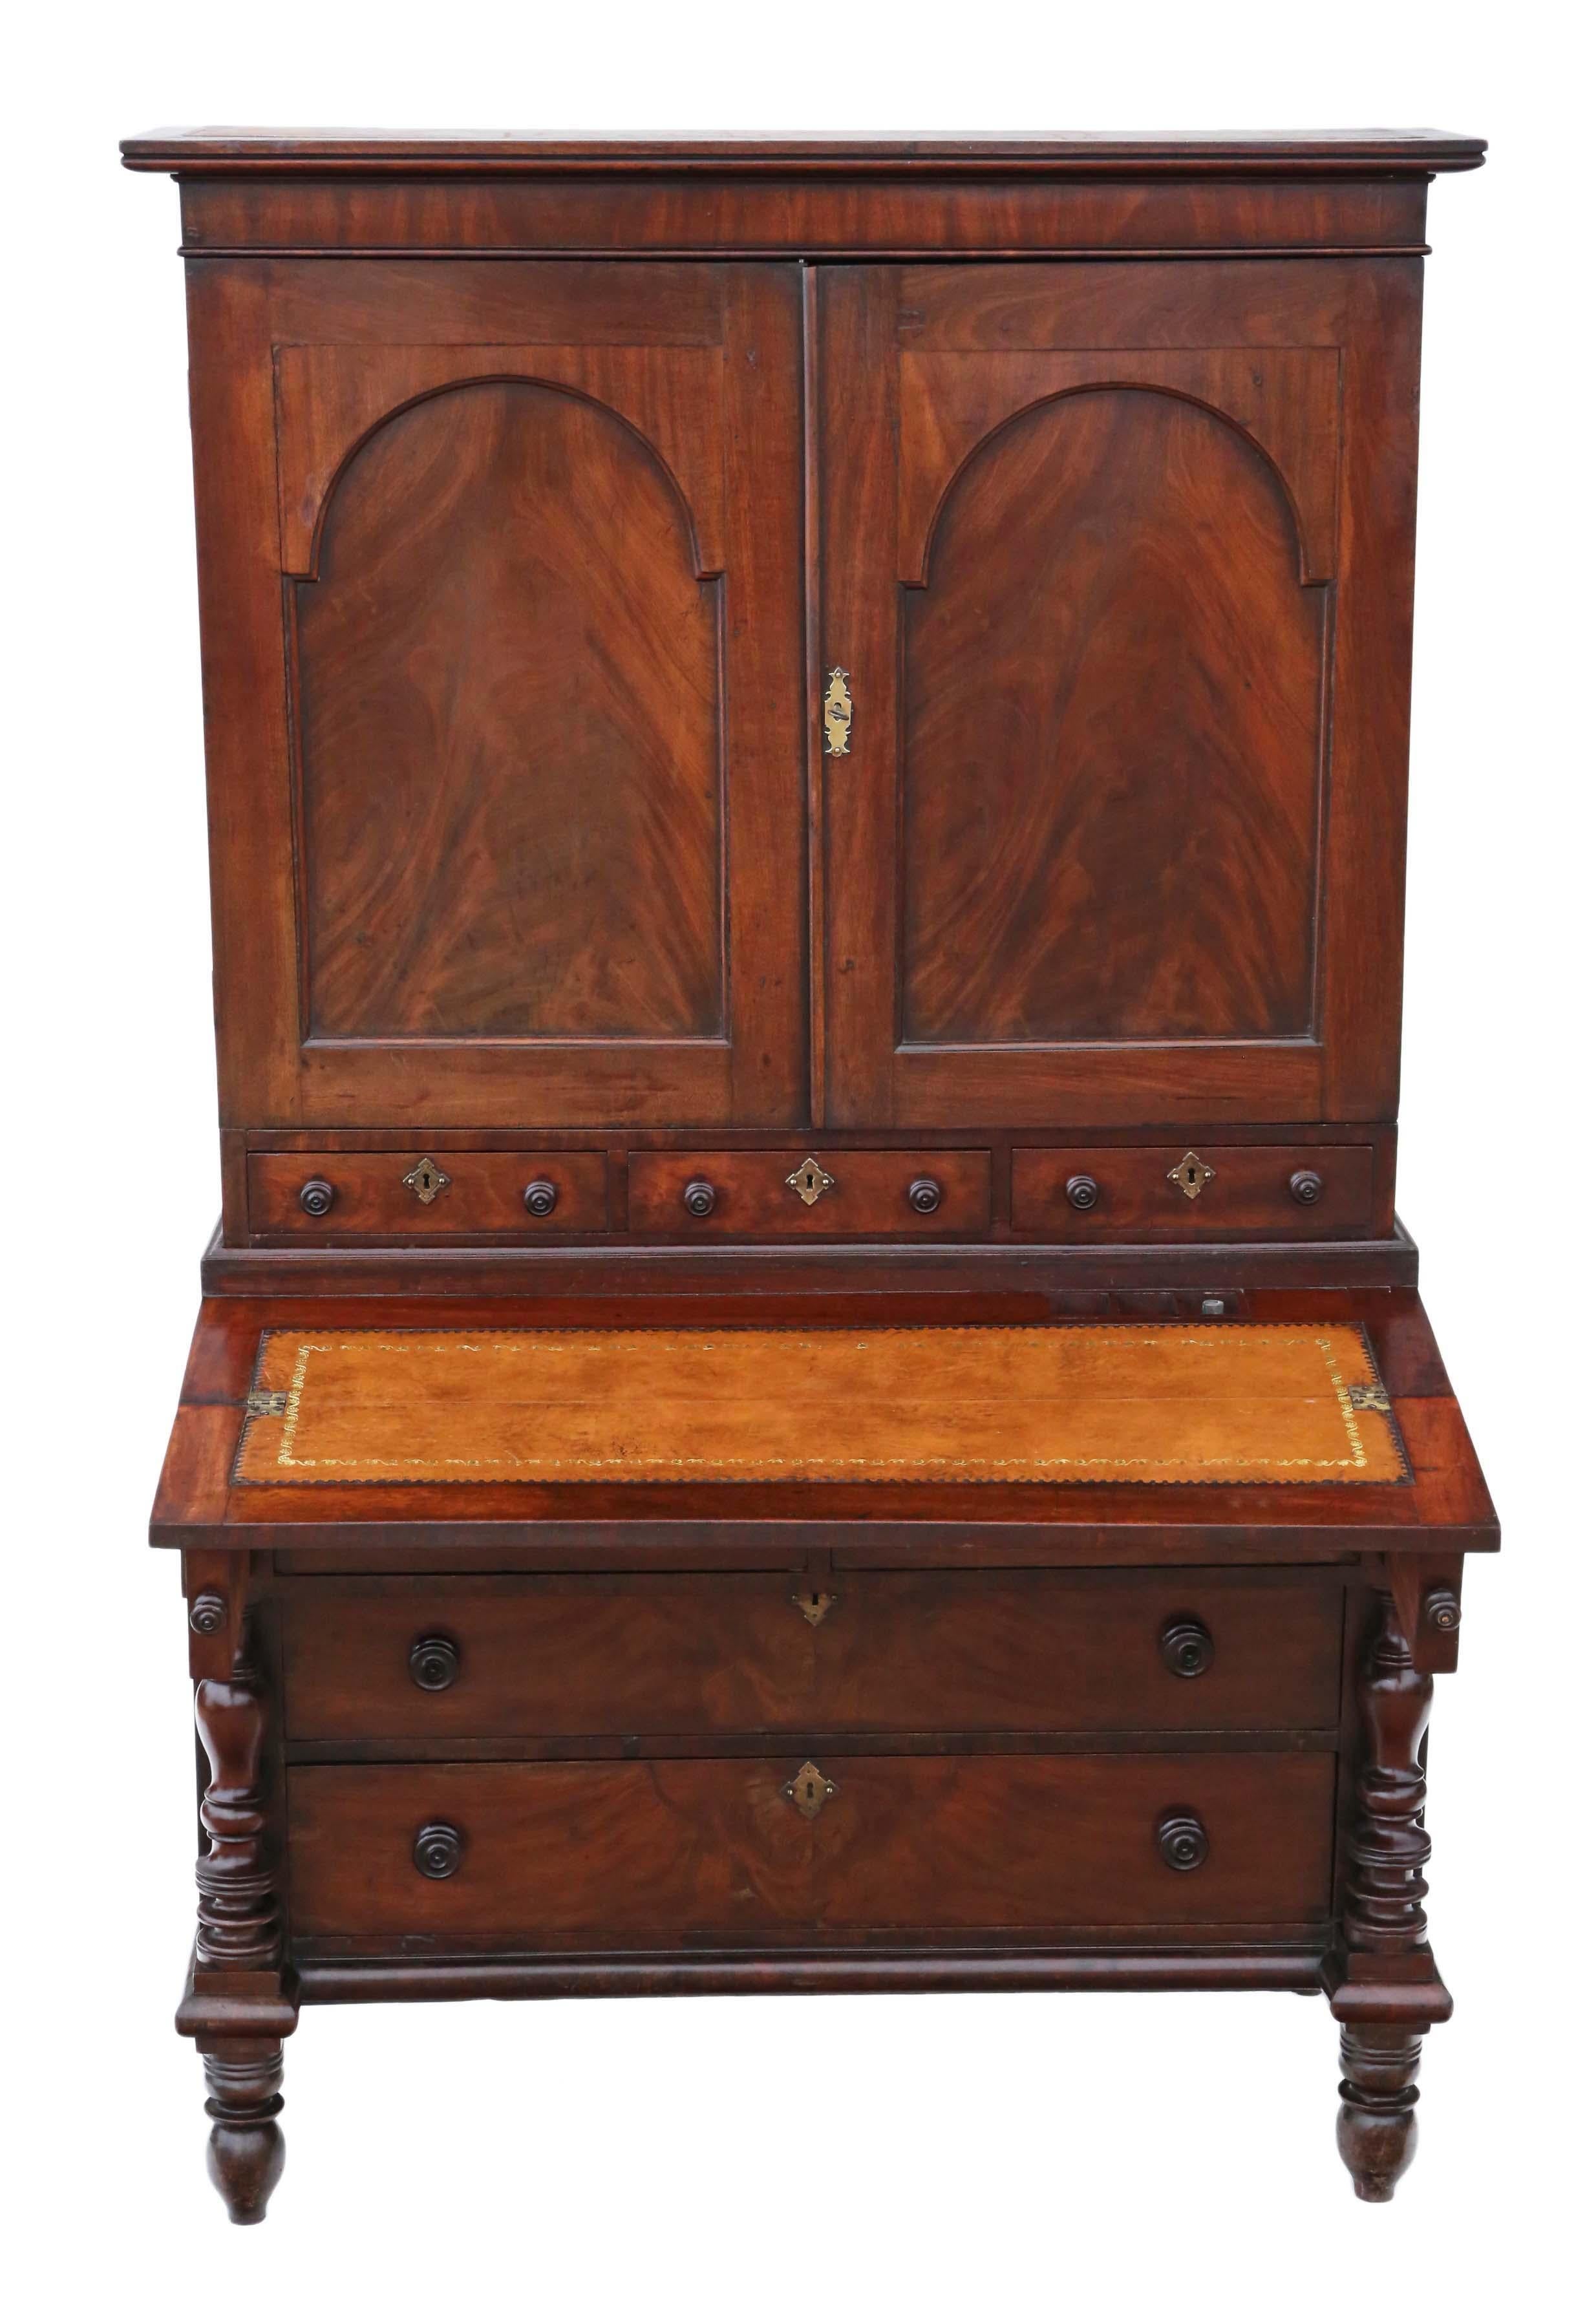 Antique Georgian housekeeper's cupboard secretaire bookcase chest crafted during the George III era around 1800. Also known as an estate cupboard, this rare period piece showcases exceptional quality.

Sturdy and well-constructed with no loose